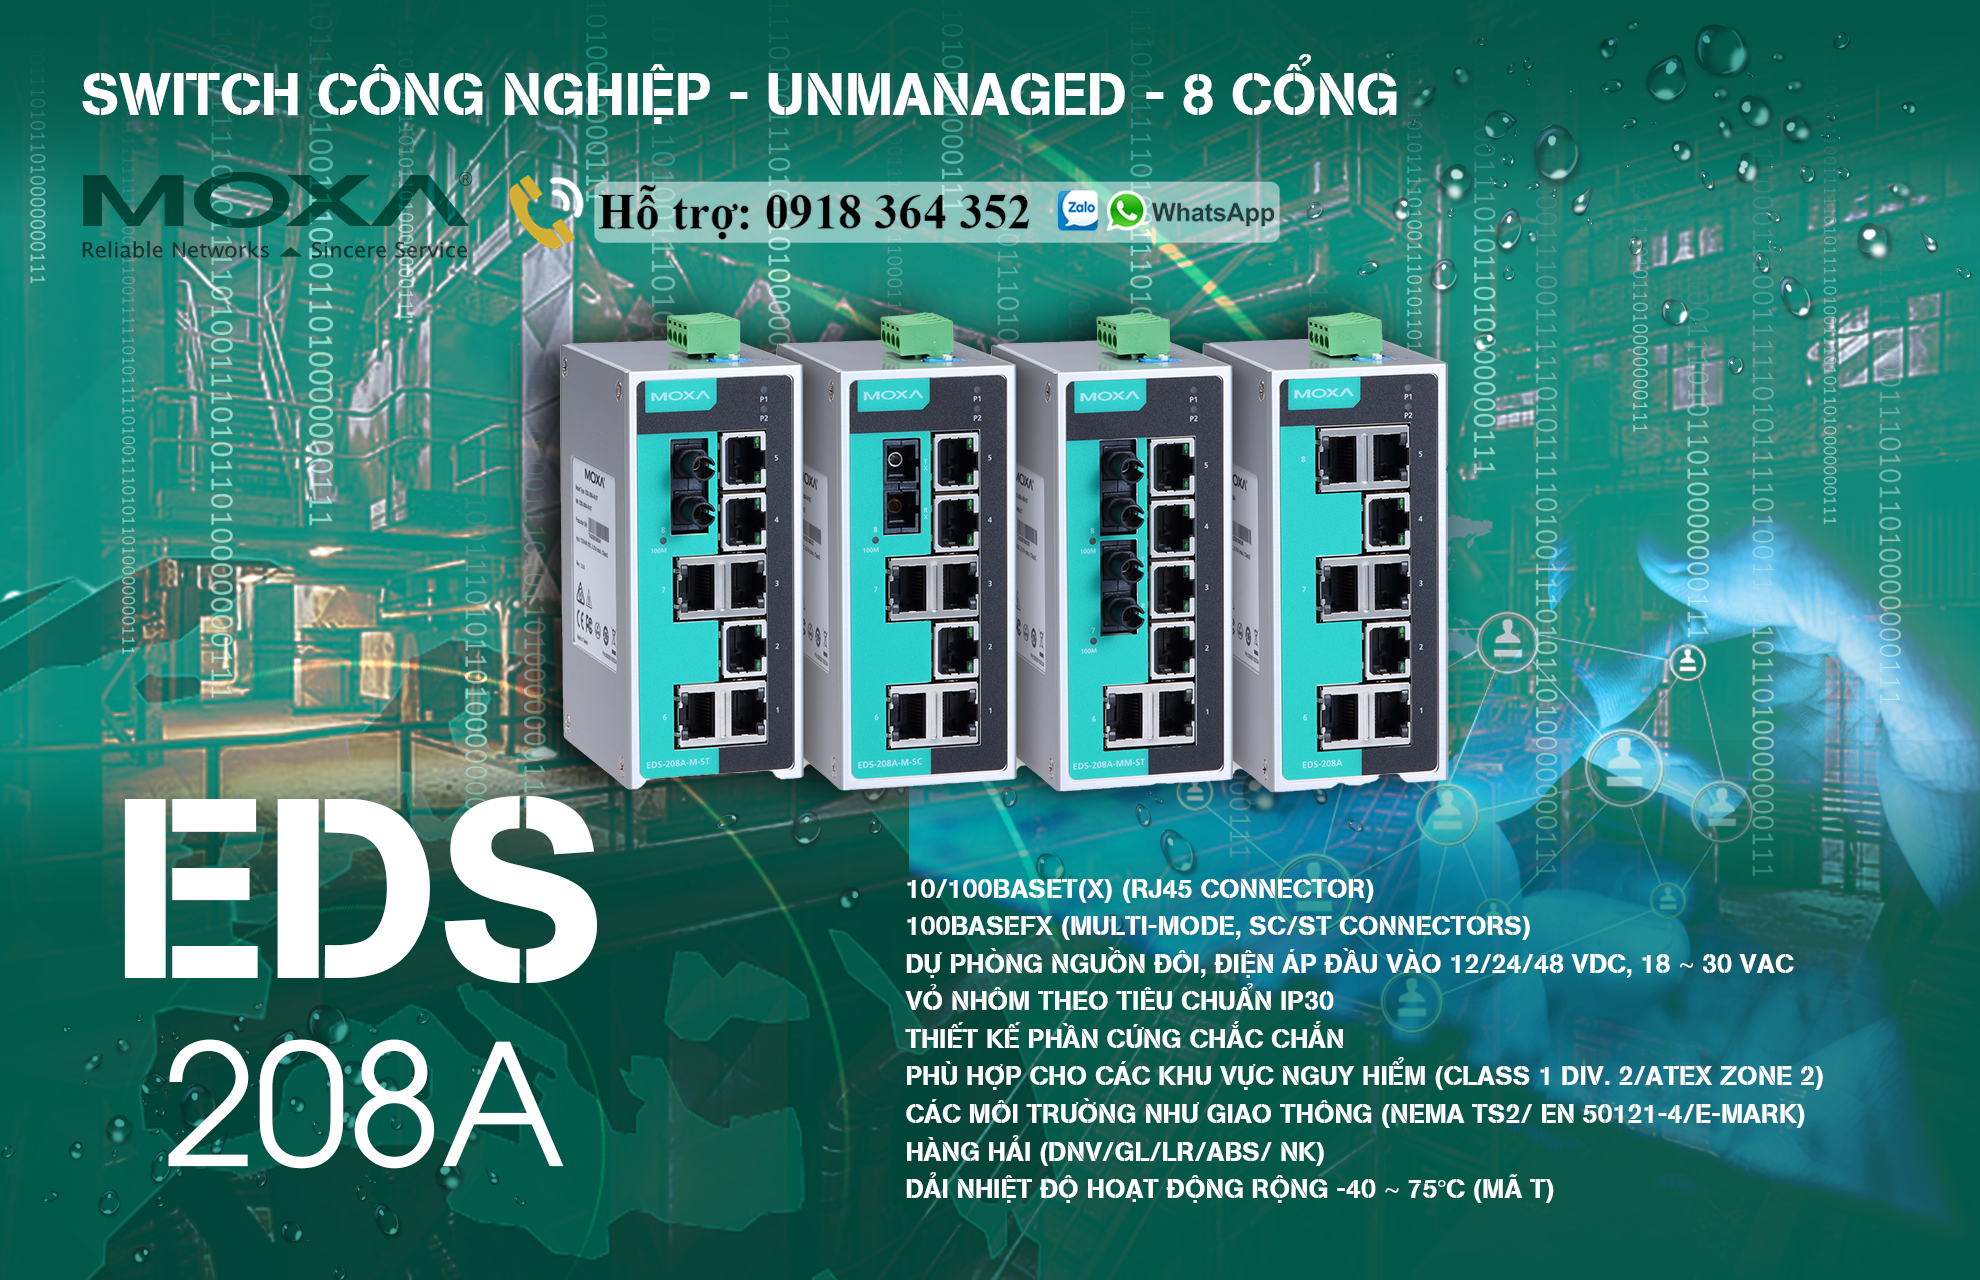 eds-208a-mm-sc-switch-cong-nghiep-8-cong-toc-do-10-100m-dai-ly-switch-mang-cong-nghiep-moxa-viet-nam.png